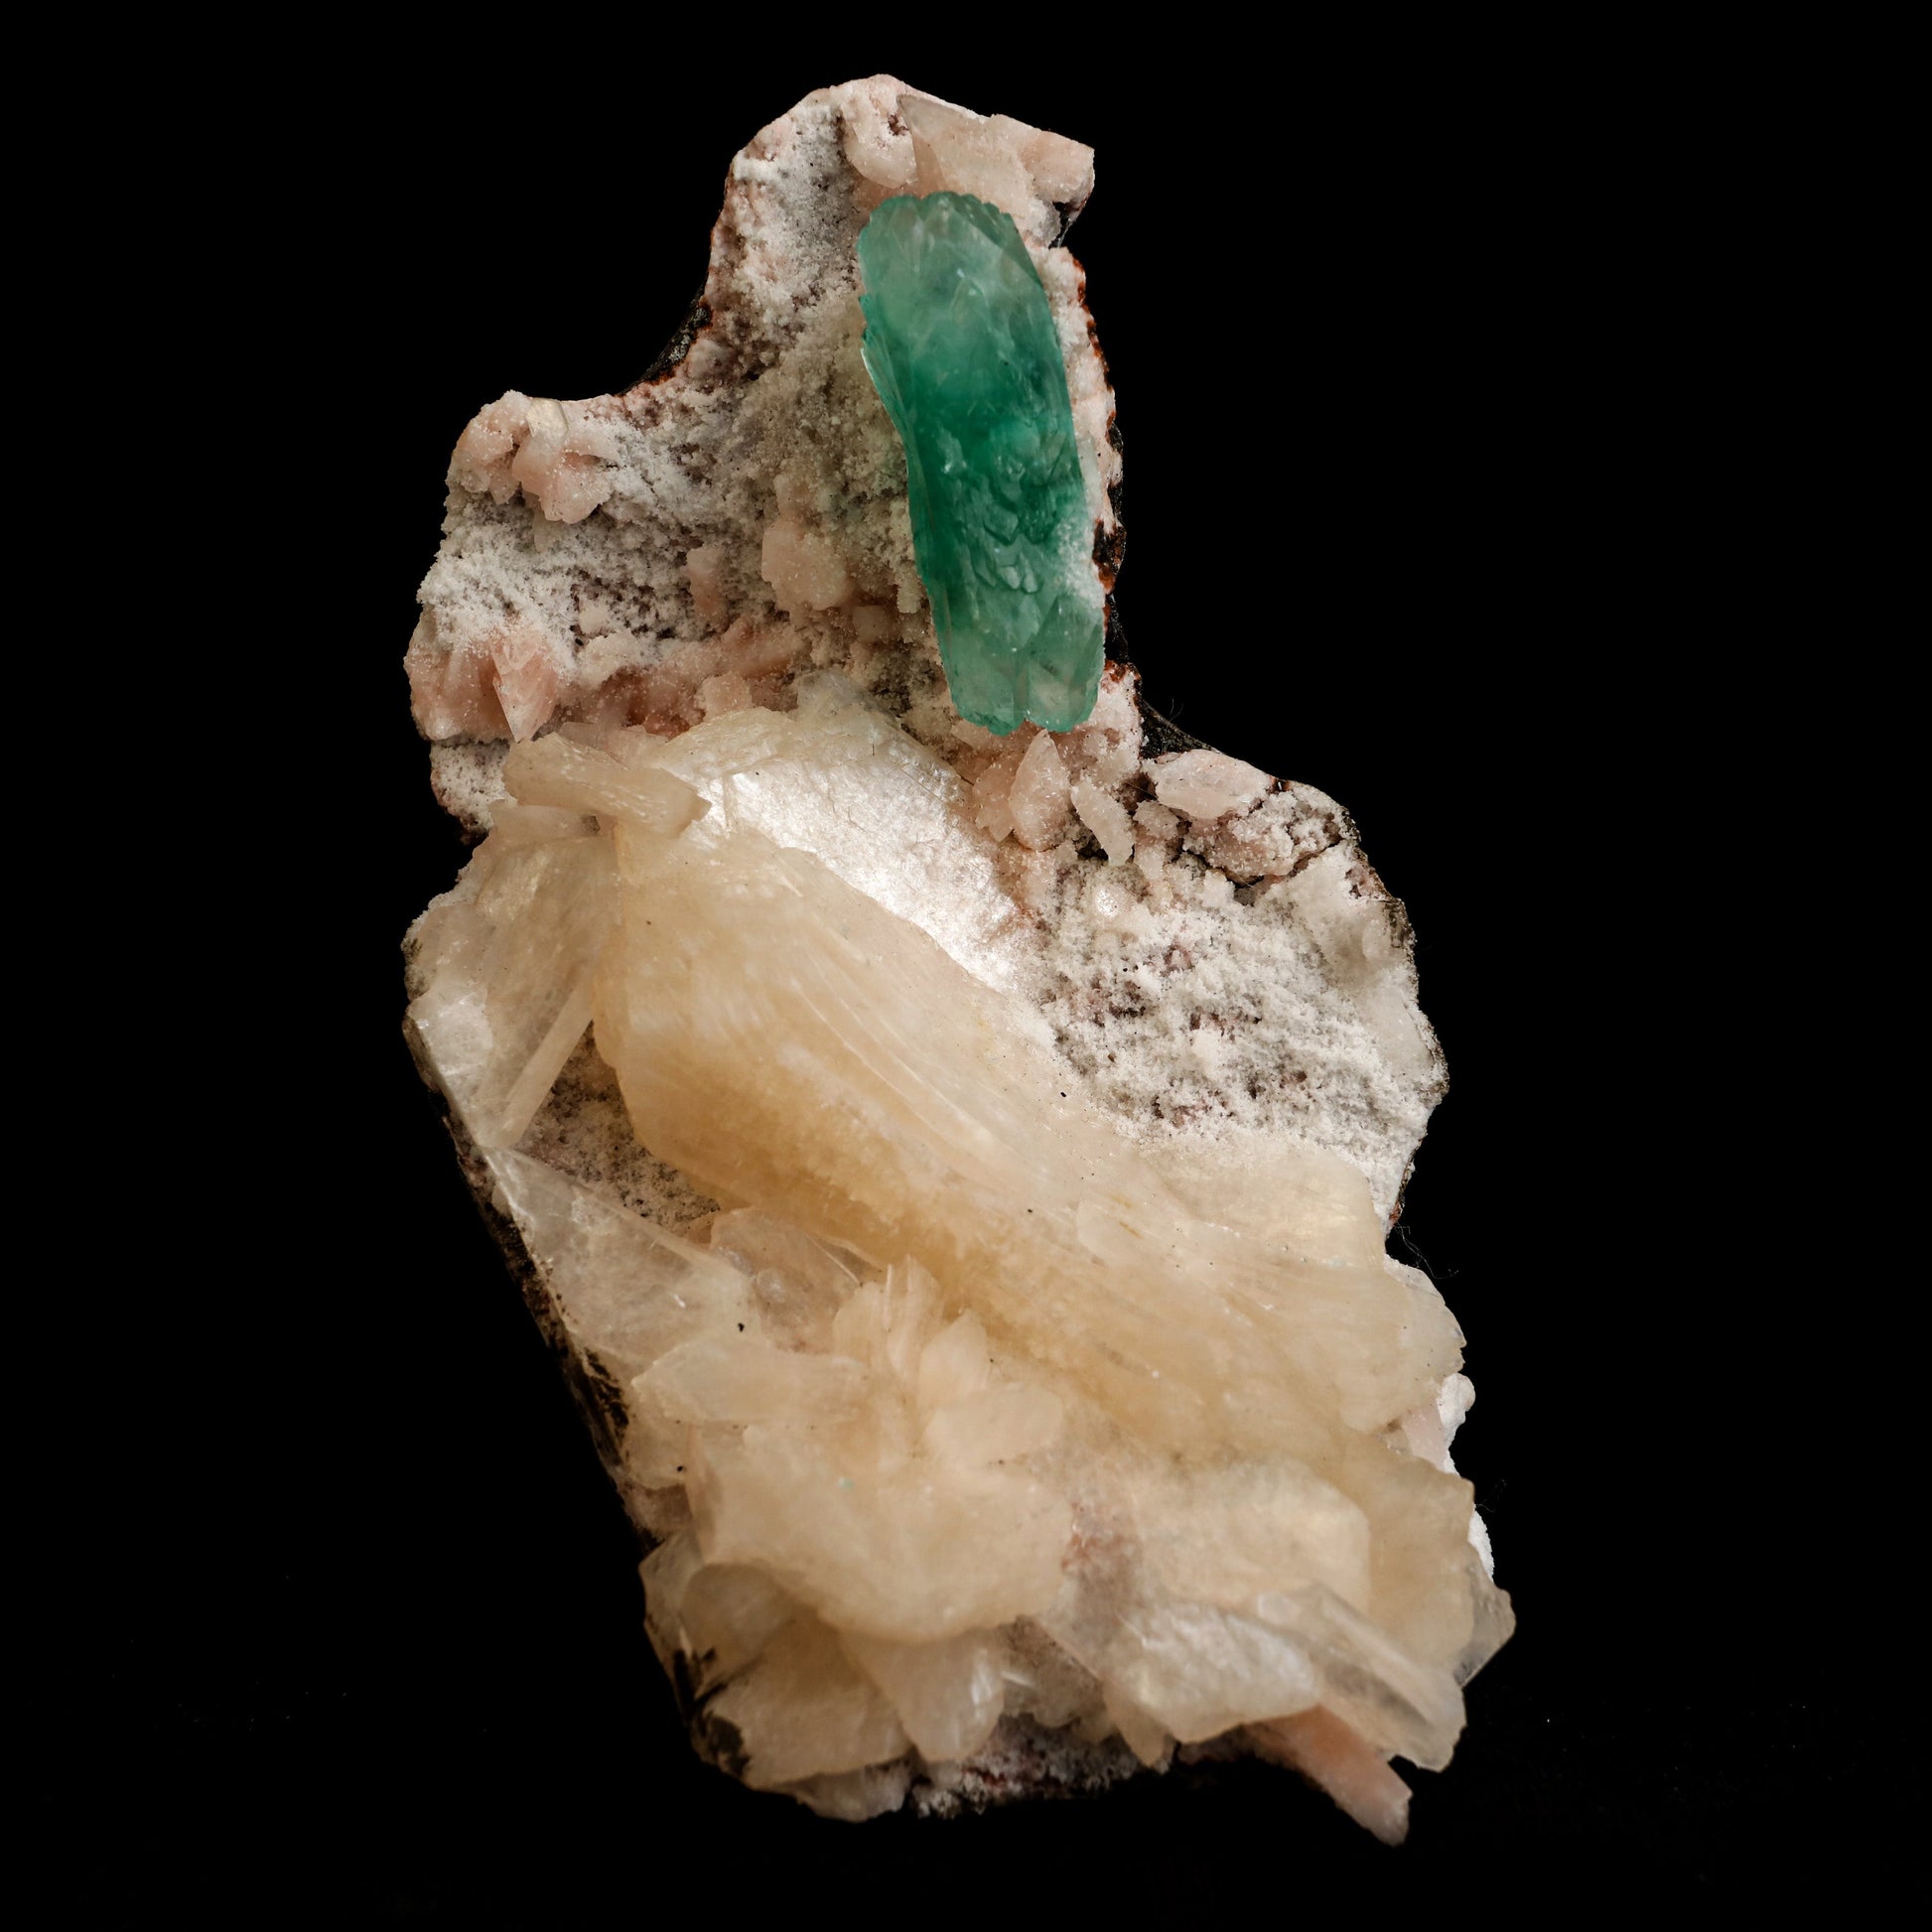 Green Apophyllite with Stilbite Natural Mineral Specimen # B 5045  https://www.superbminerals.us/products/green-apophyllite-with-stilbite-natural-mineral-specimen-b-5045  Features: Transparent green apophyllite crystals long with lustrous crystal faces and steep pyramidal terminations on matrix coated with lustrous peach-baggie coloured Stilbite crystals of varying sizes. Primary Mineral(s): Apophyllite